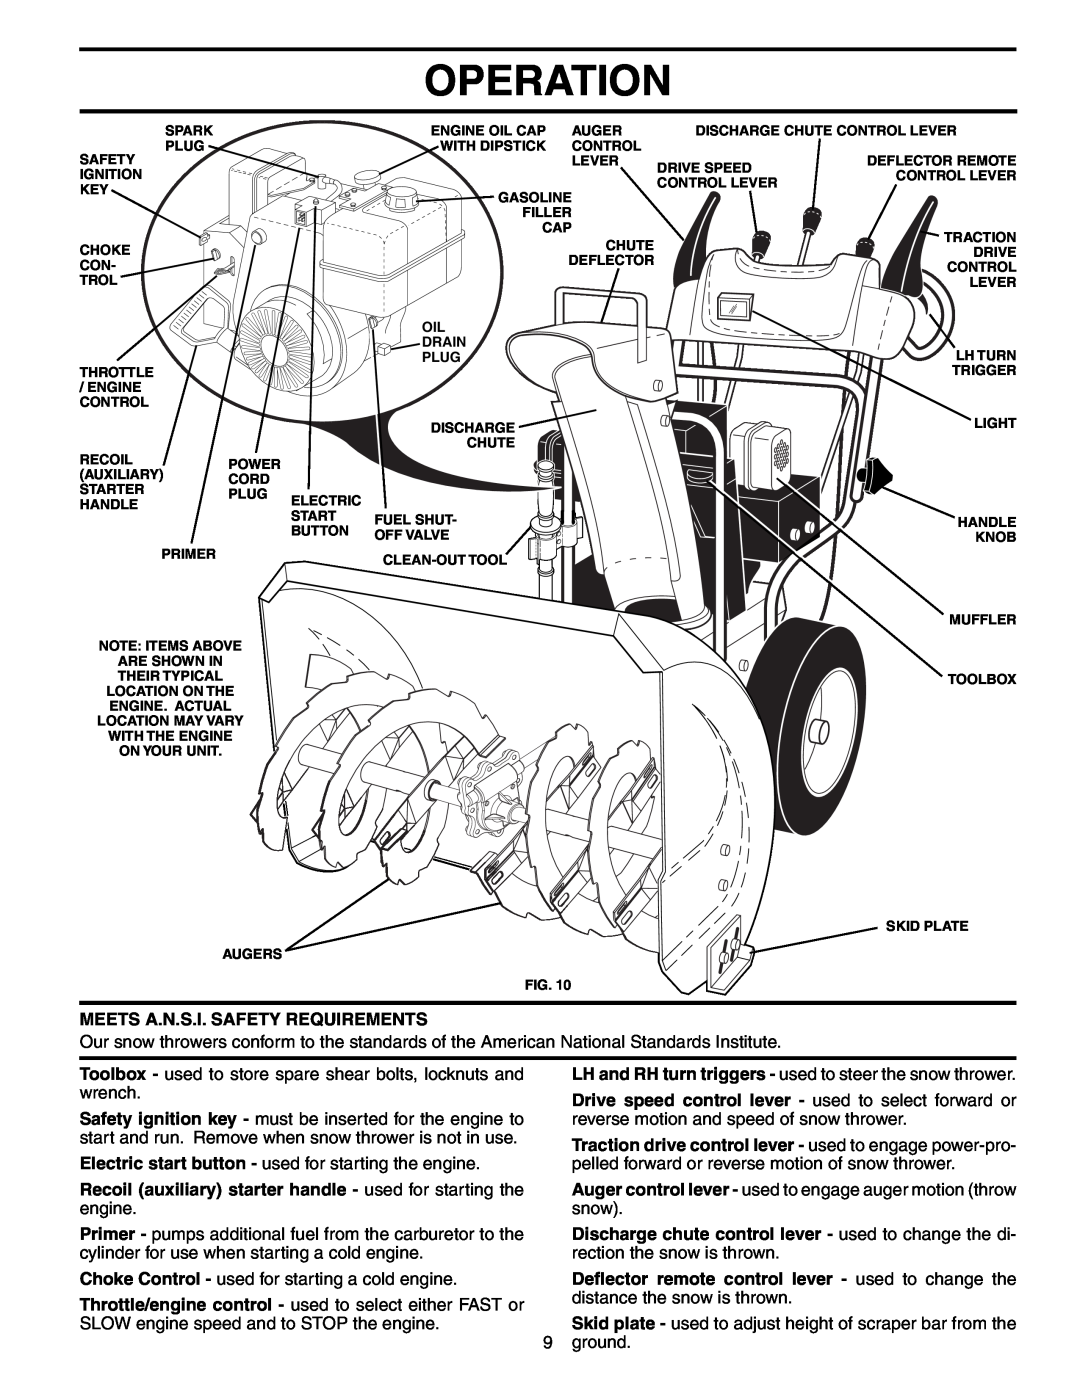 Poulan 192044 owner manual Operation, Meets A.N.S.I. Safety Requirements 